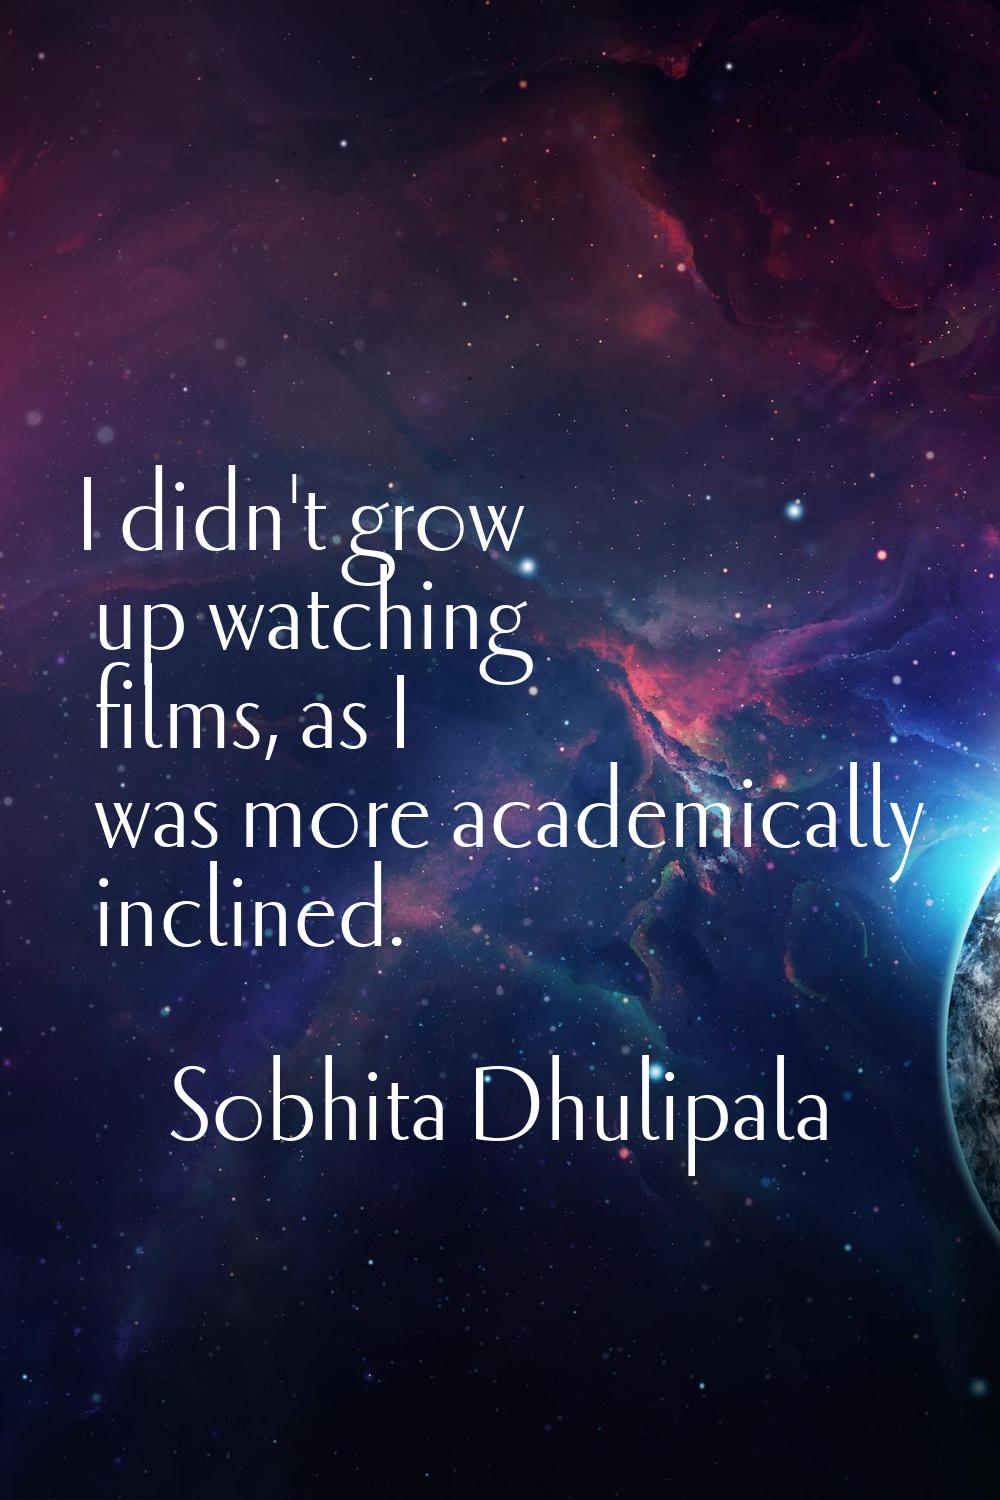 I didn't grow up watching films, as I was more academically inclined.